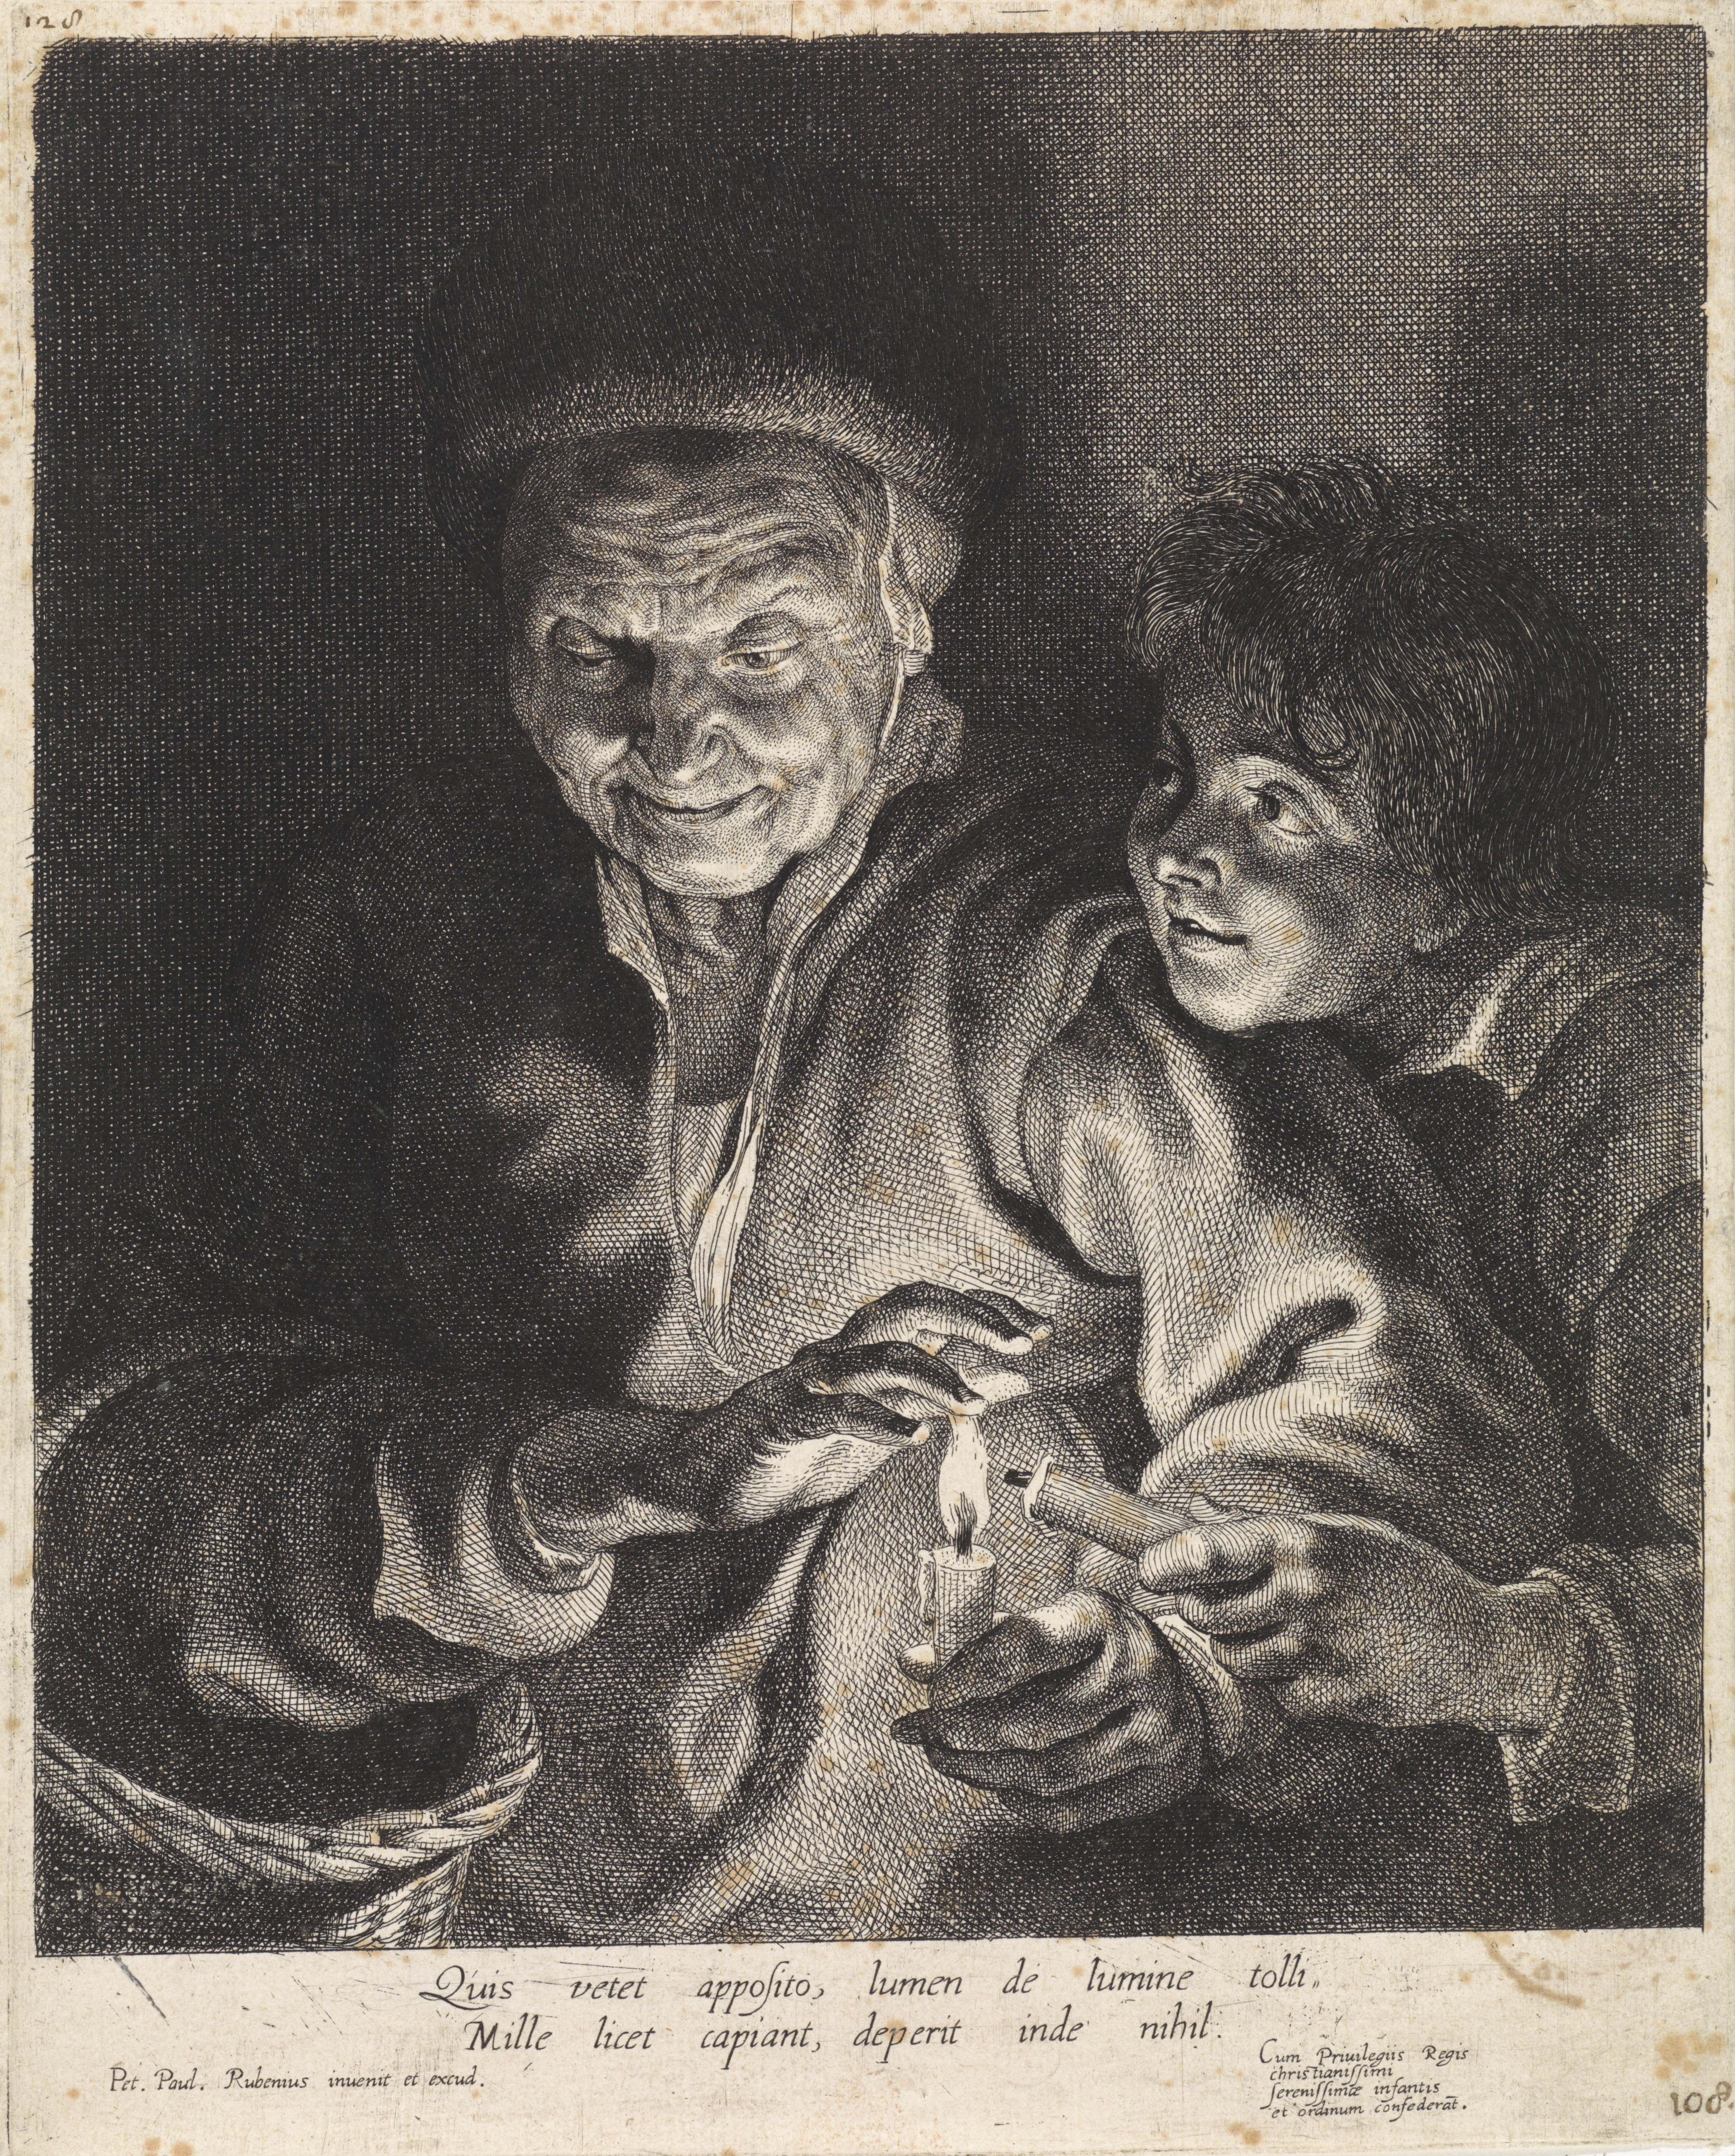 Old woman and a boy with candle by Paulus Pontius, 1620.